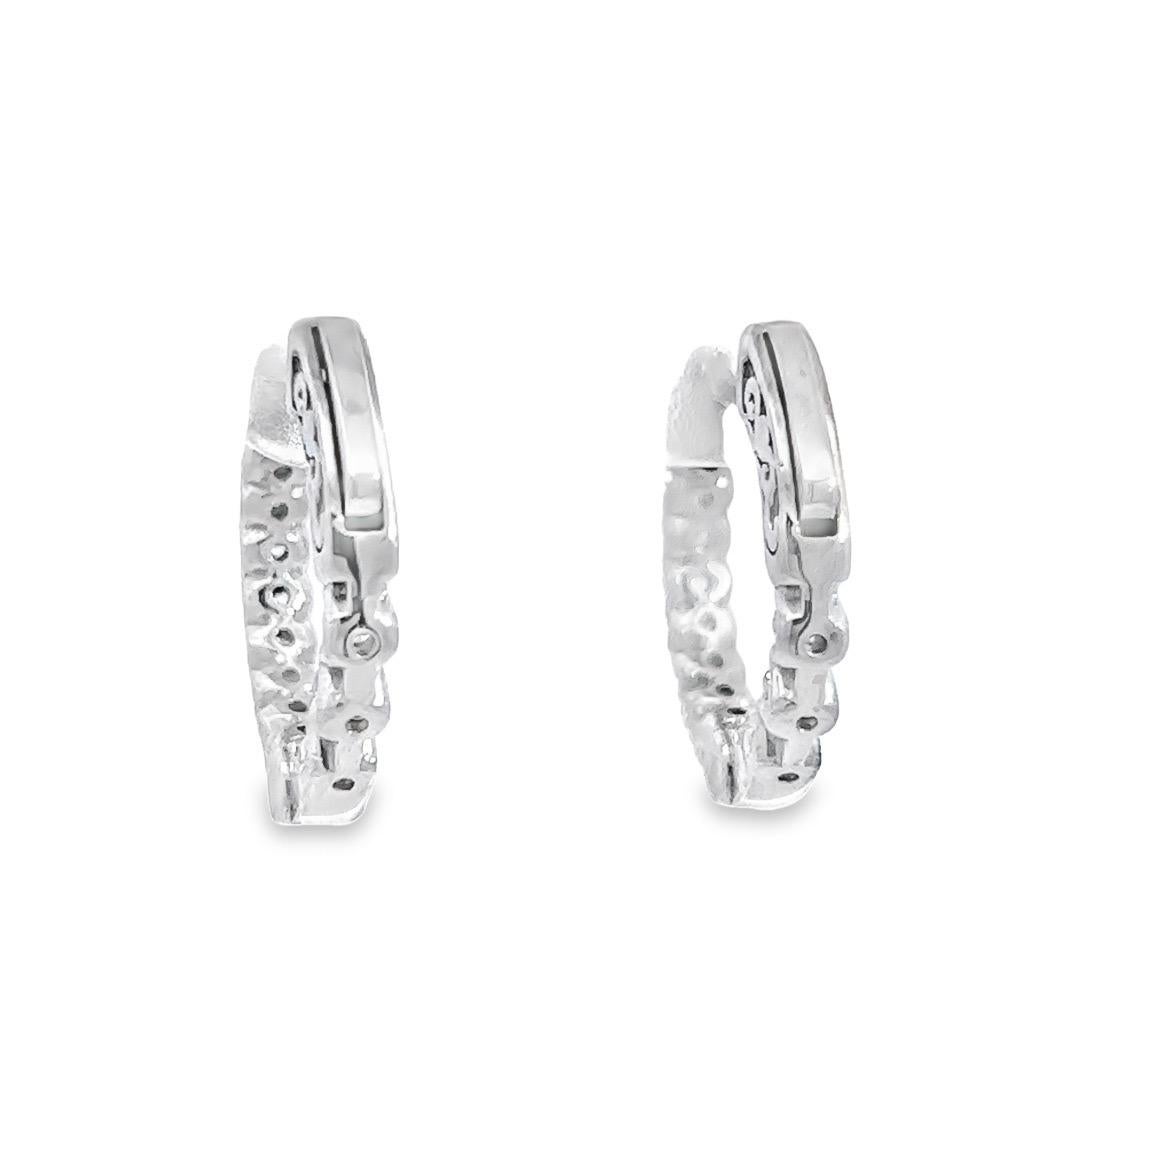 Diamond Hoops
Natural full Brilliant Cut Diamonds 
14k White Gold
1.00 Total Carat Weight
Safety lock